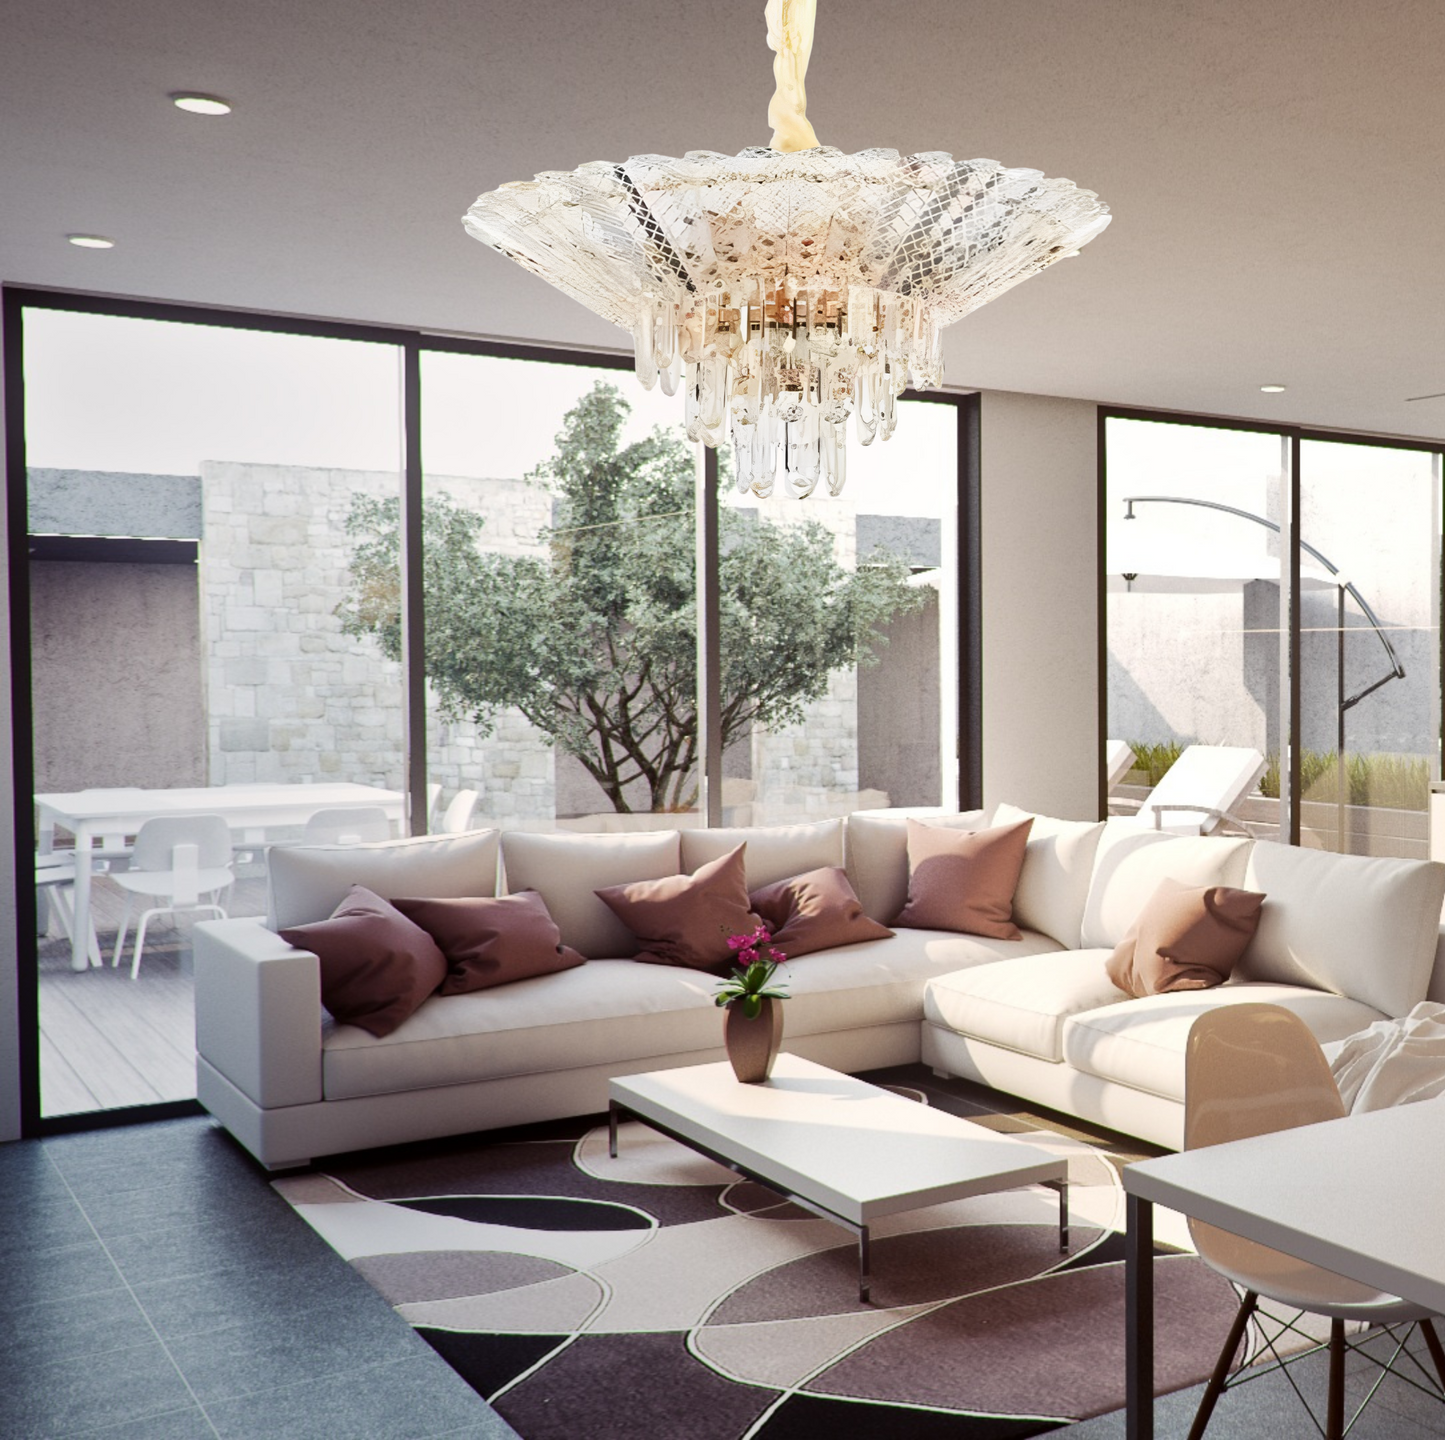 Load image into Gallery viewer, Elegant Radiance Crystal Chandelier by Gloss (SR88235/60)
